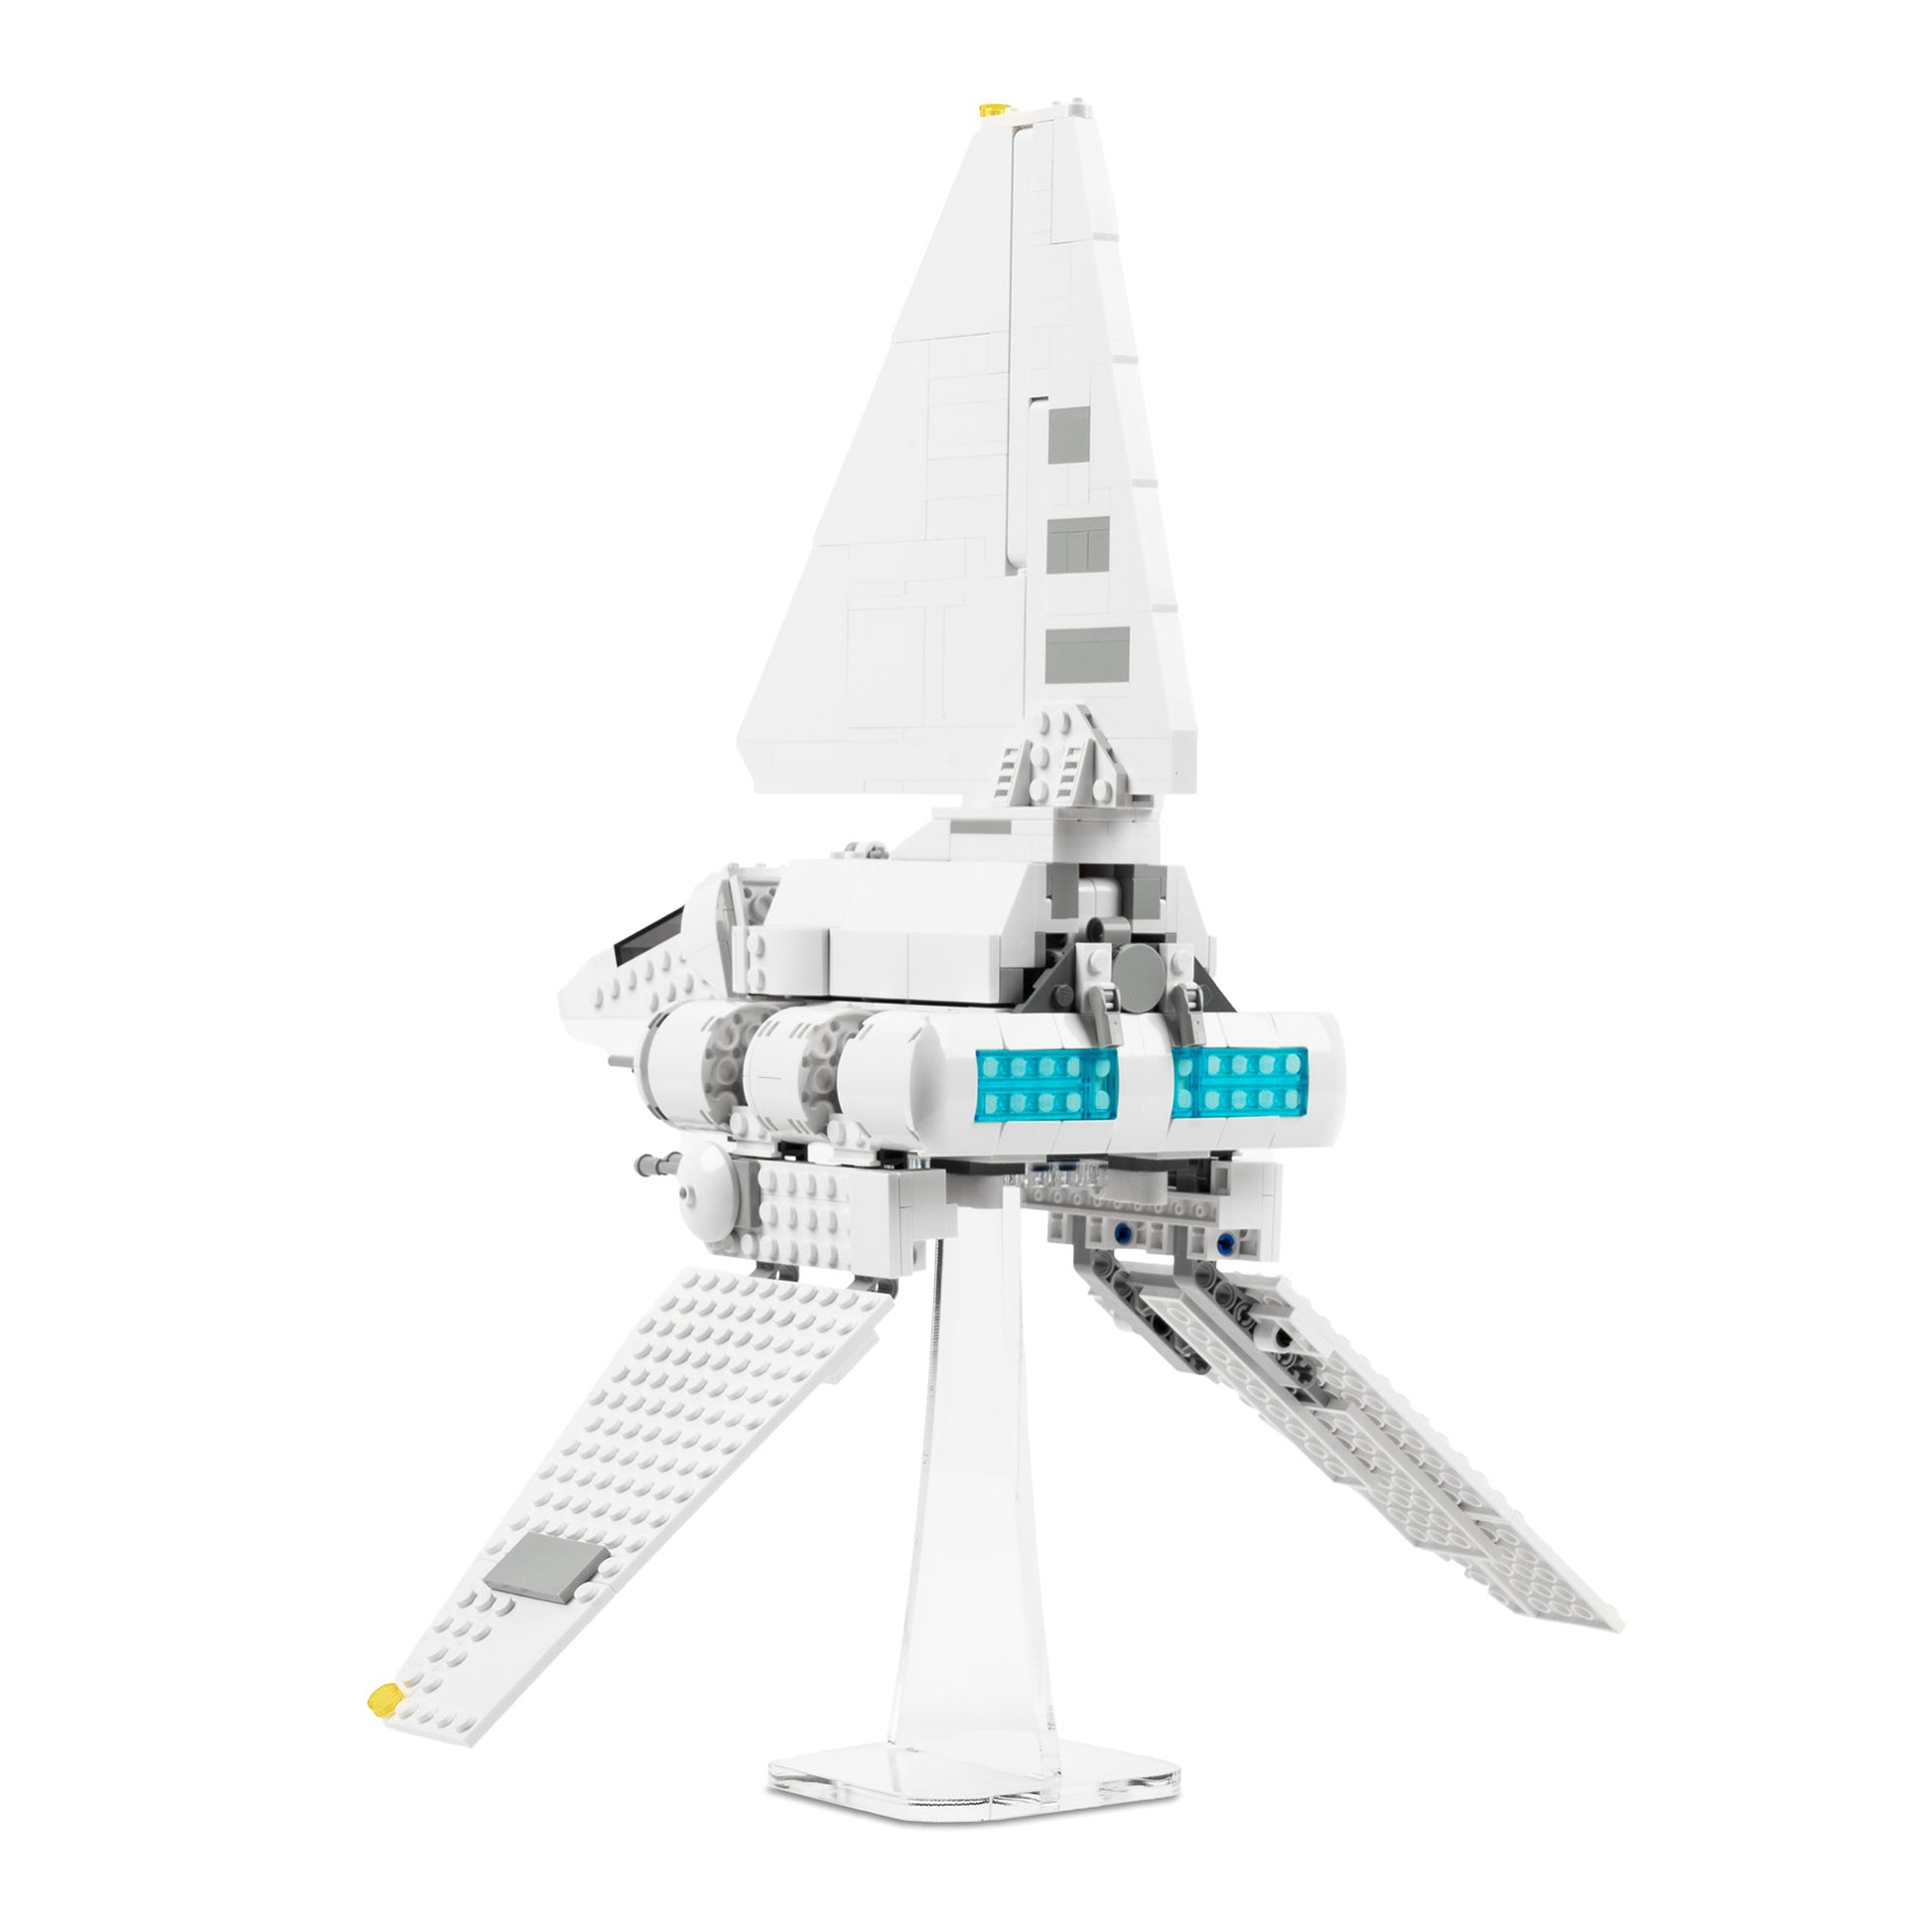 Back angled view of flat 6 inch LEGO display stand with Imperial Shuttle.